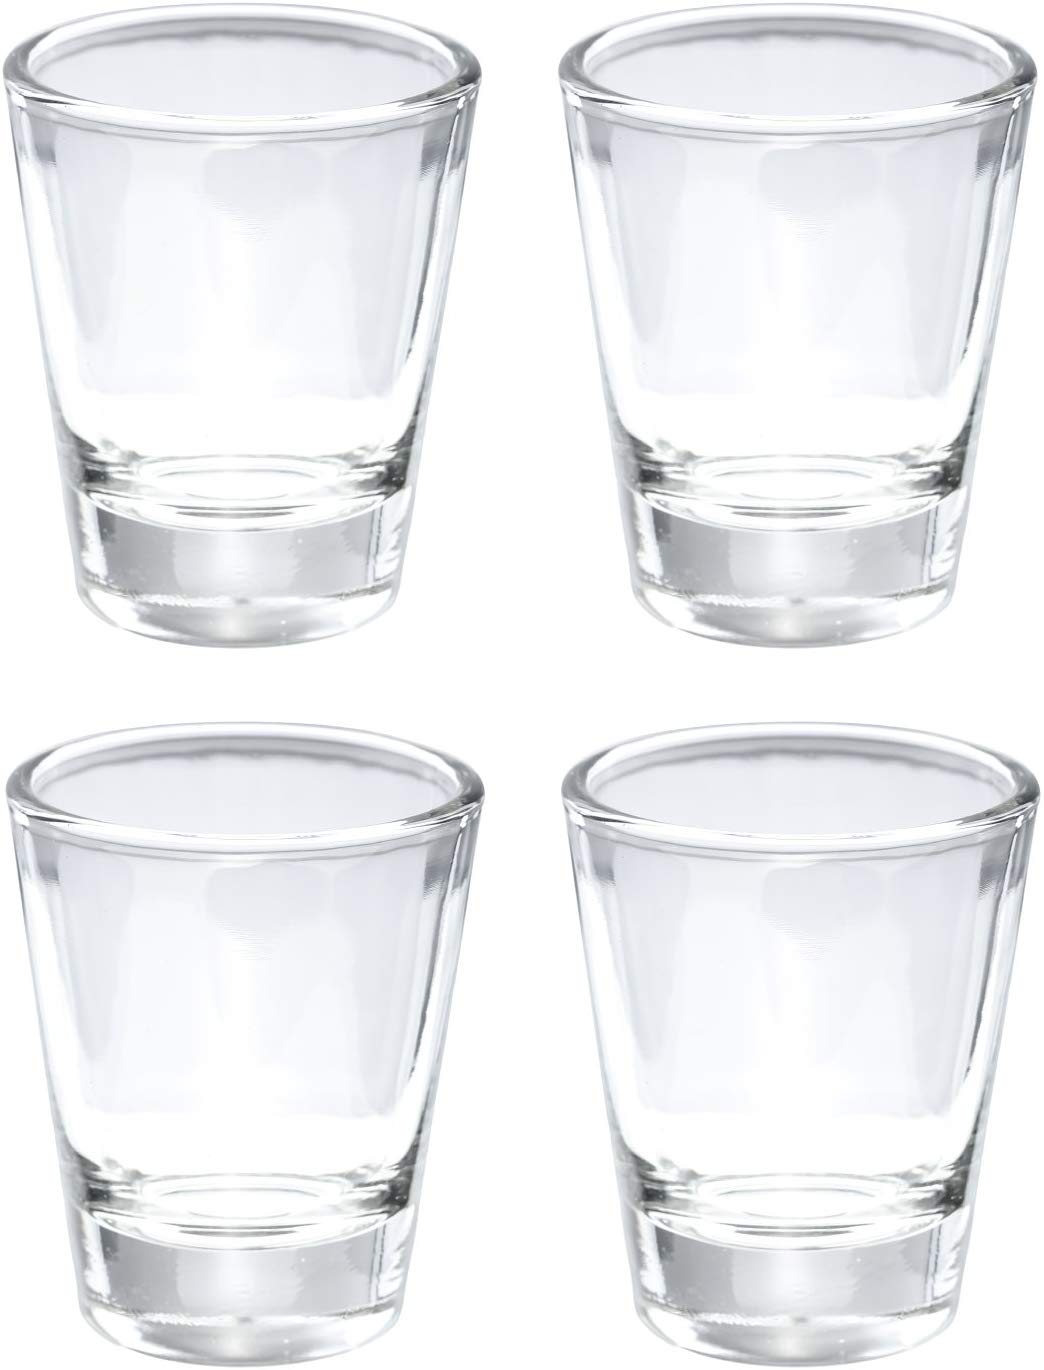 Round 1.5 oz Shot Glass with Heavy Base, Clear Glass, Set of 4